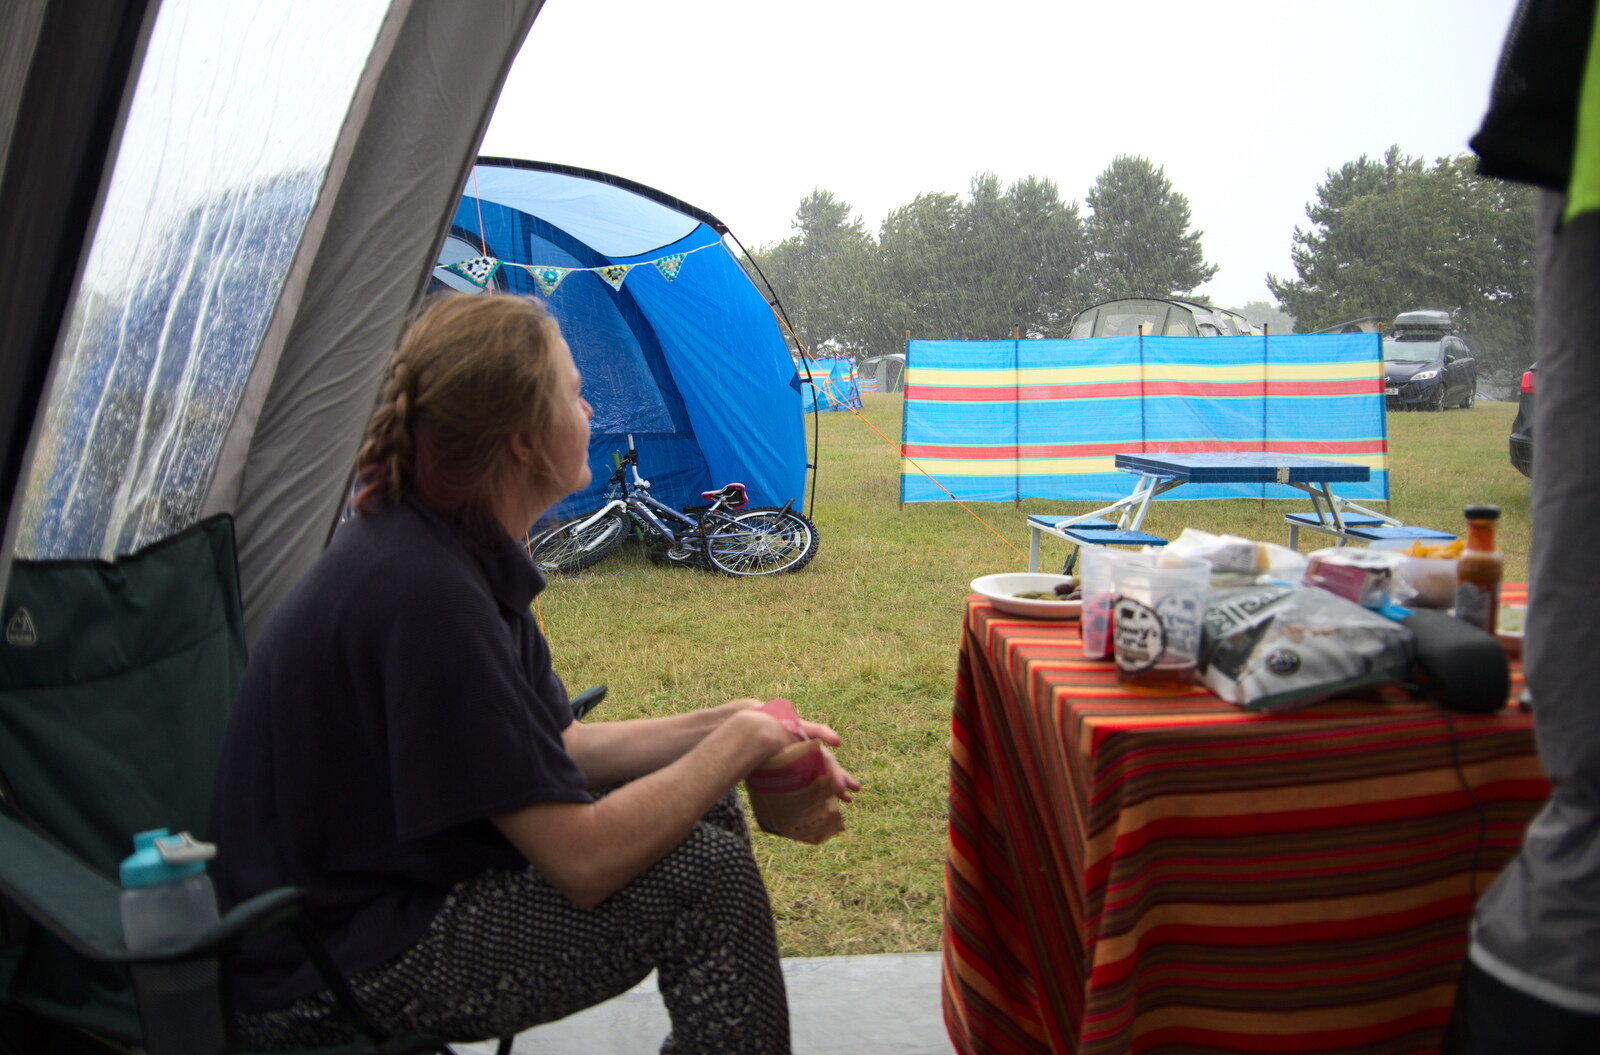 Allyson looks at the rain from Camping on the Coast, East Runton, North Norfolk - 25th July 2020